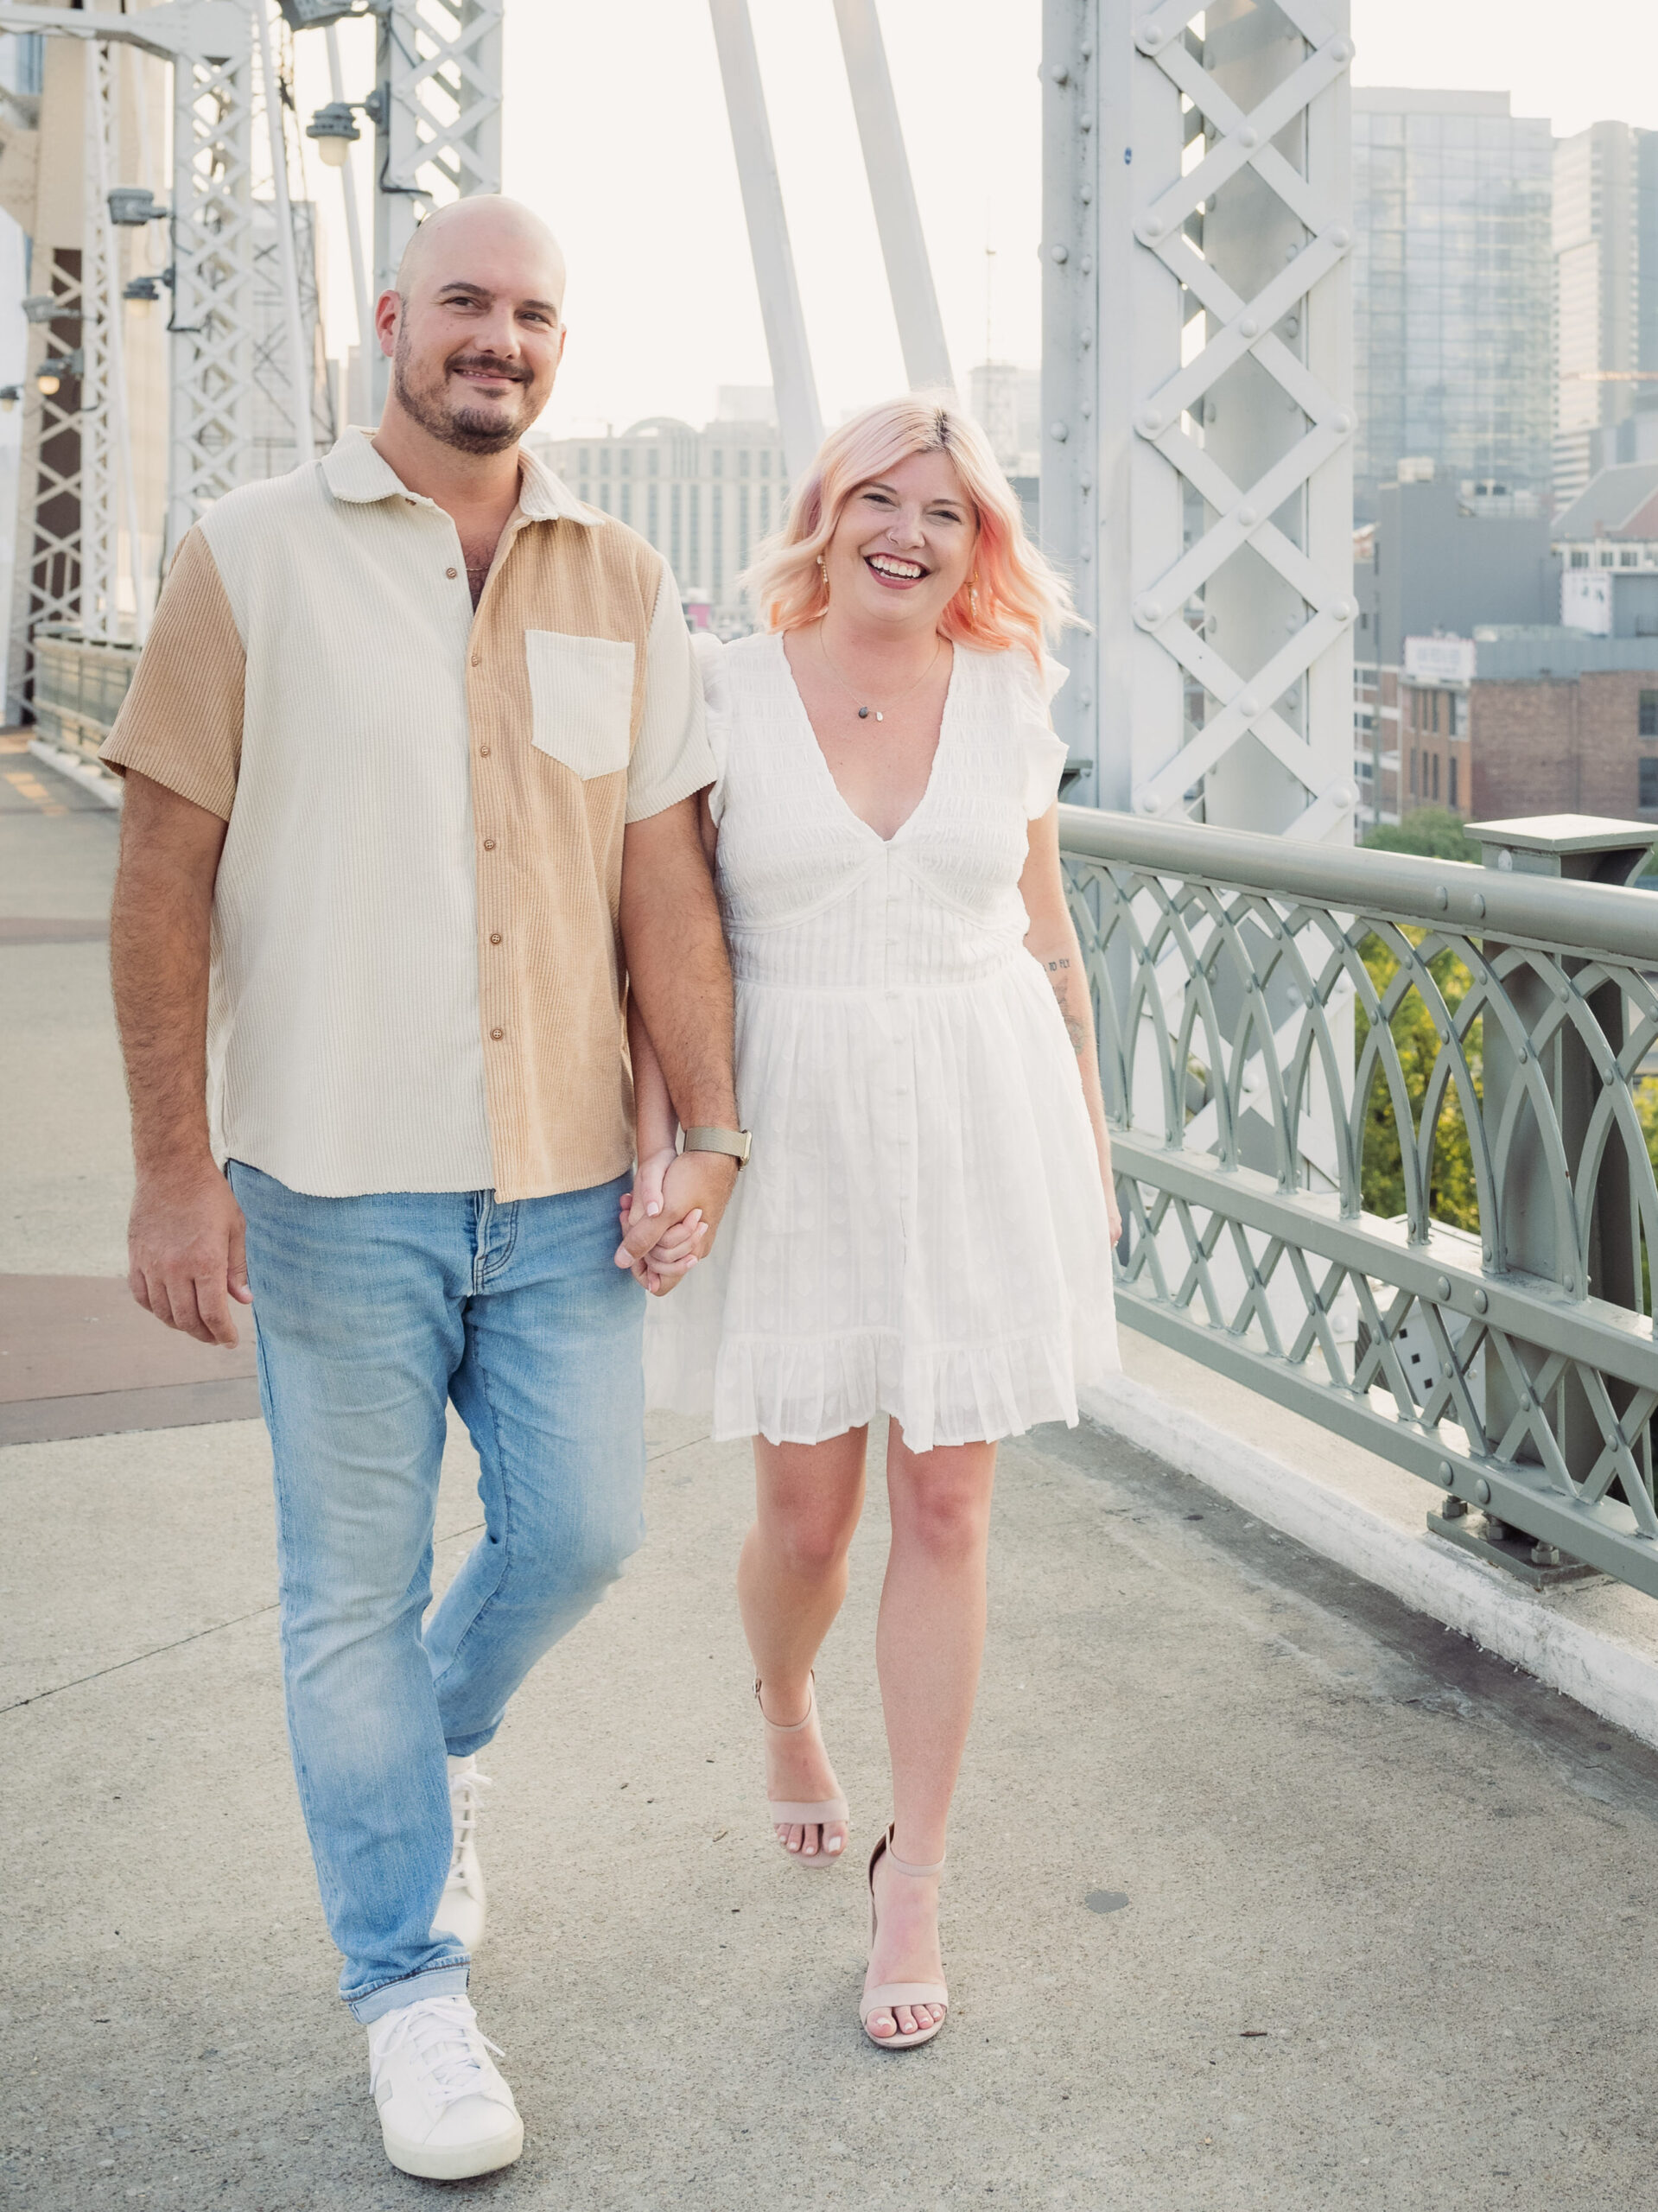 Couple wears light and airy colors for a brighter look in their engagement photo outfits.